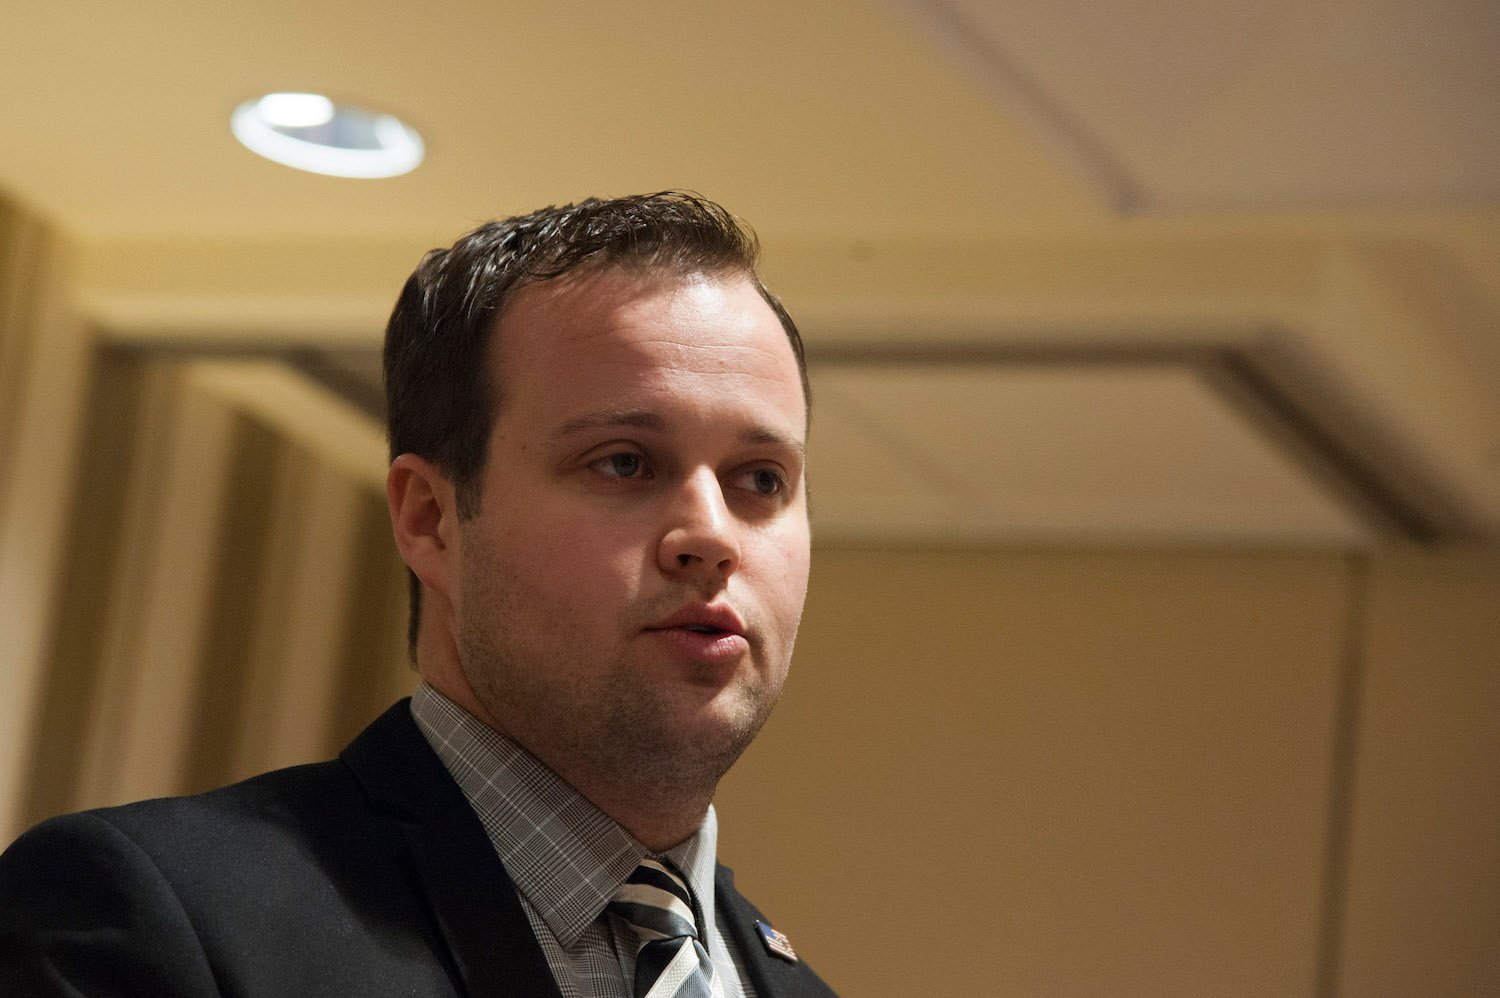 A close-up of Josh Duggar wearing a suit at an event